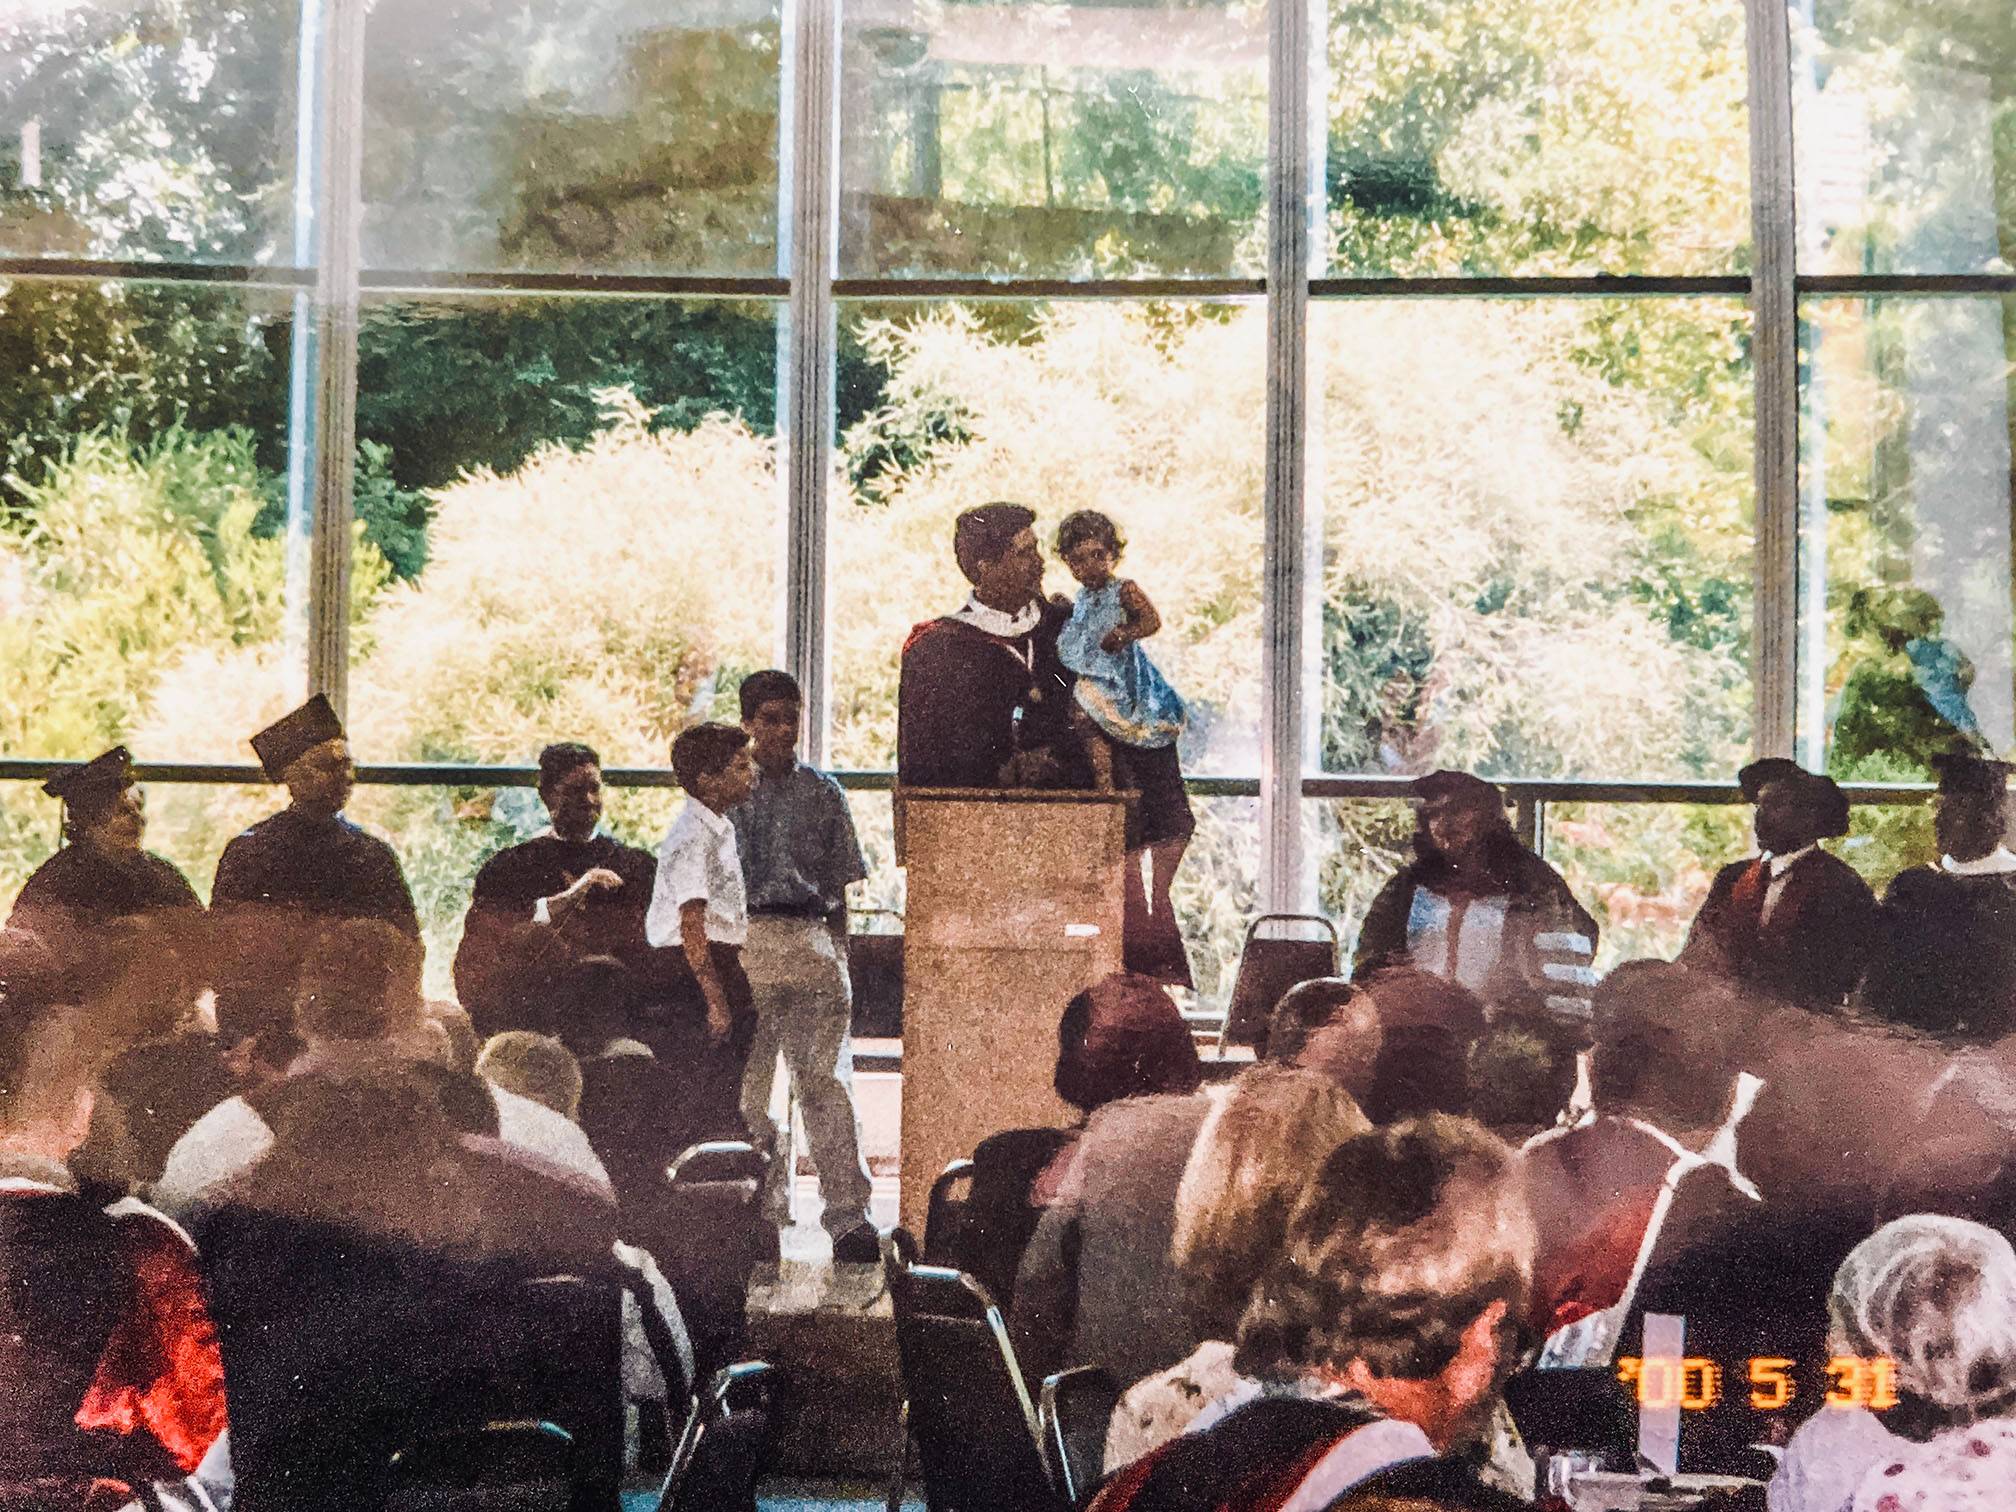 Kevin holds his daughter, Anna Marie, who was less than a year and a half old at the time, as he gave his summa cum laude speech at California State University’s commencement ceremony in 2000.